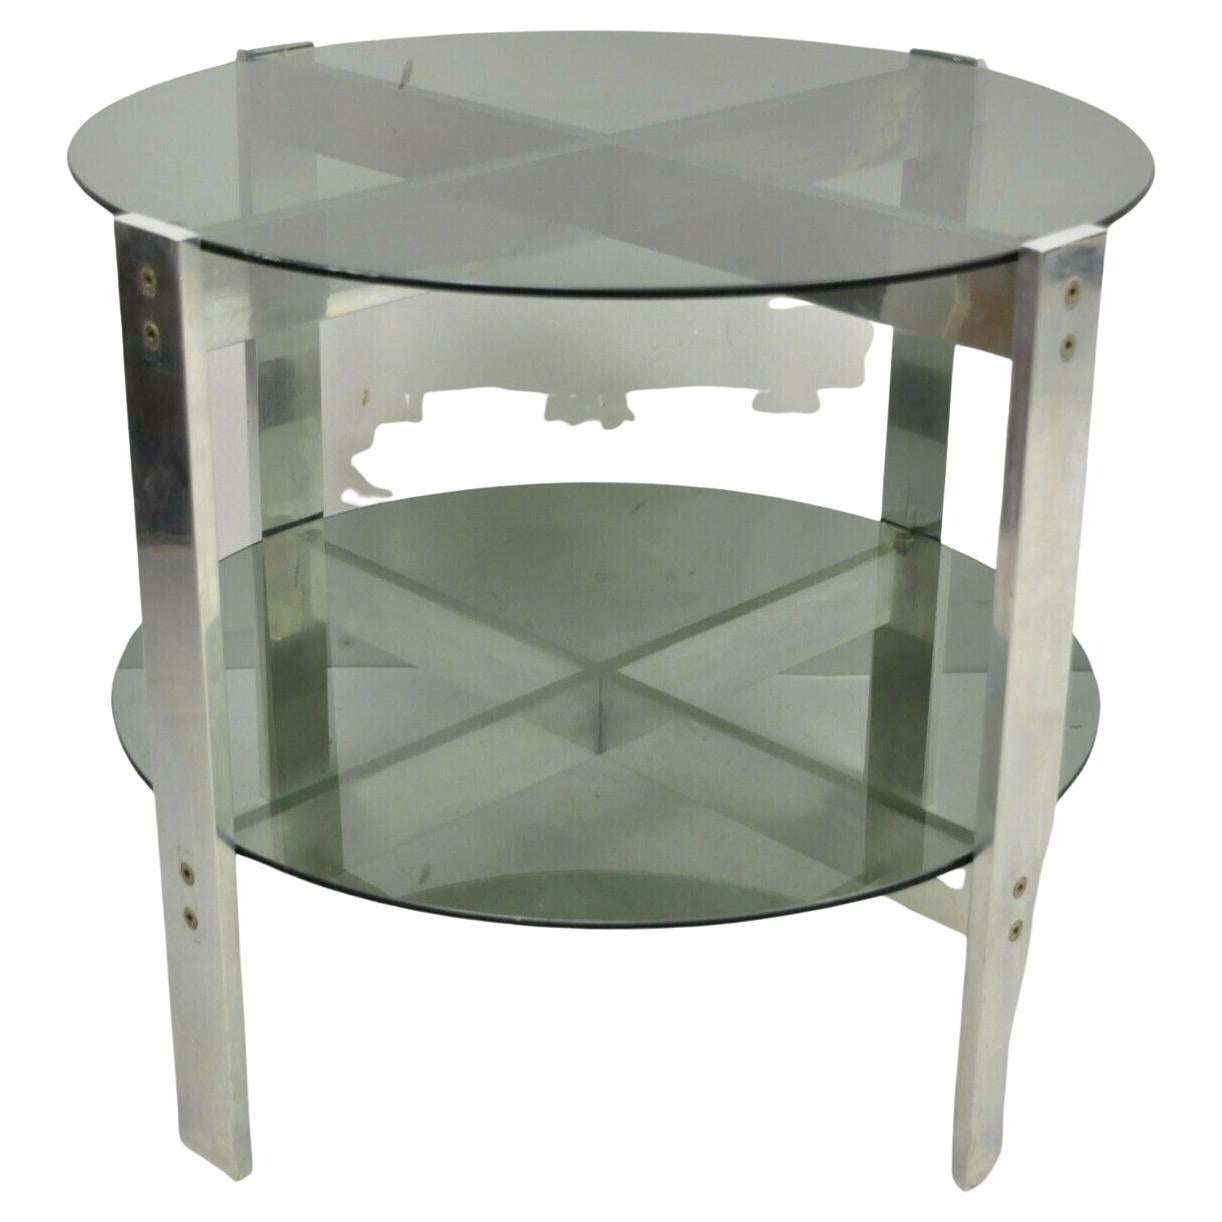 Vintage Mid-Century Modern Round Smoked Glass 2 Tier Aluminum Base Side Table